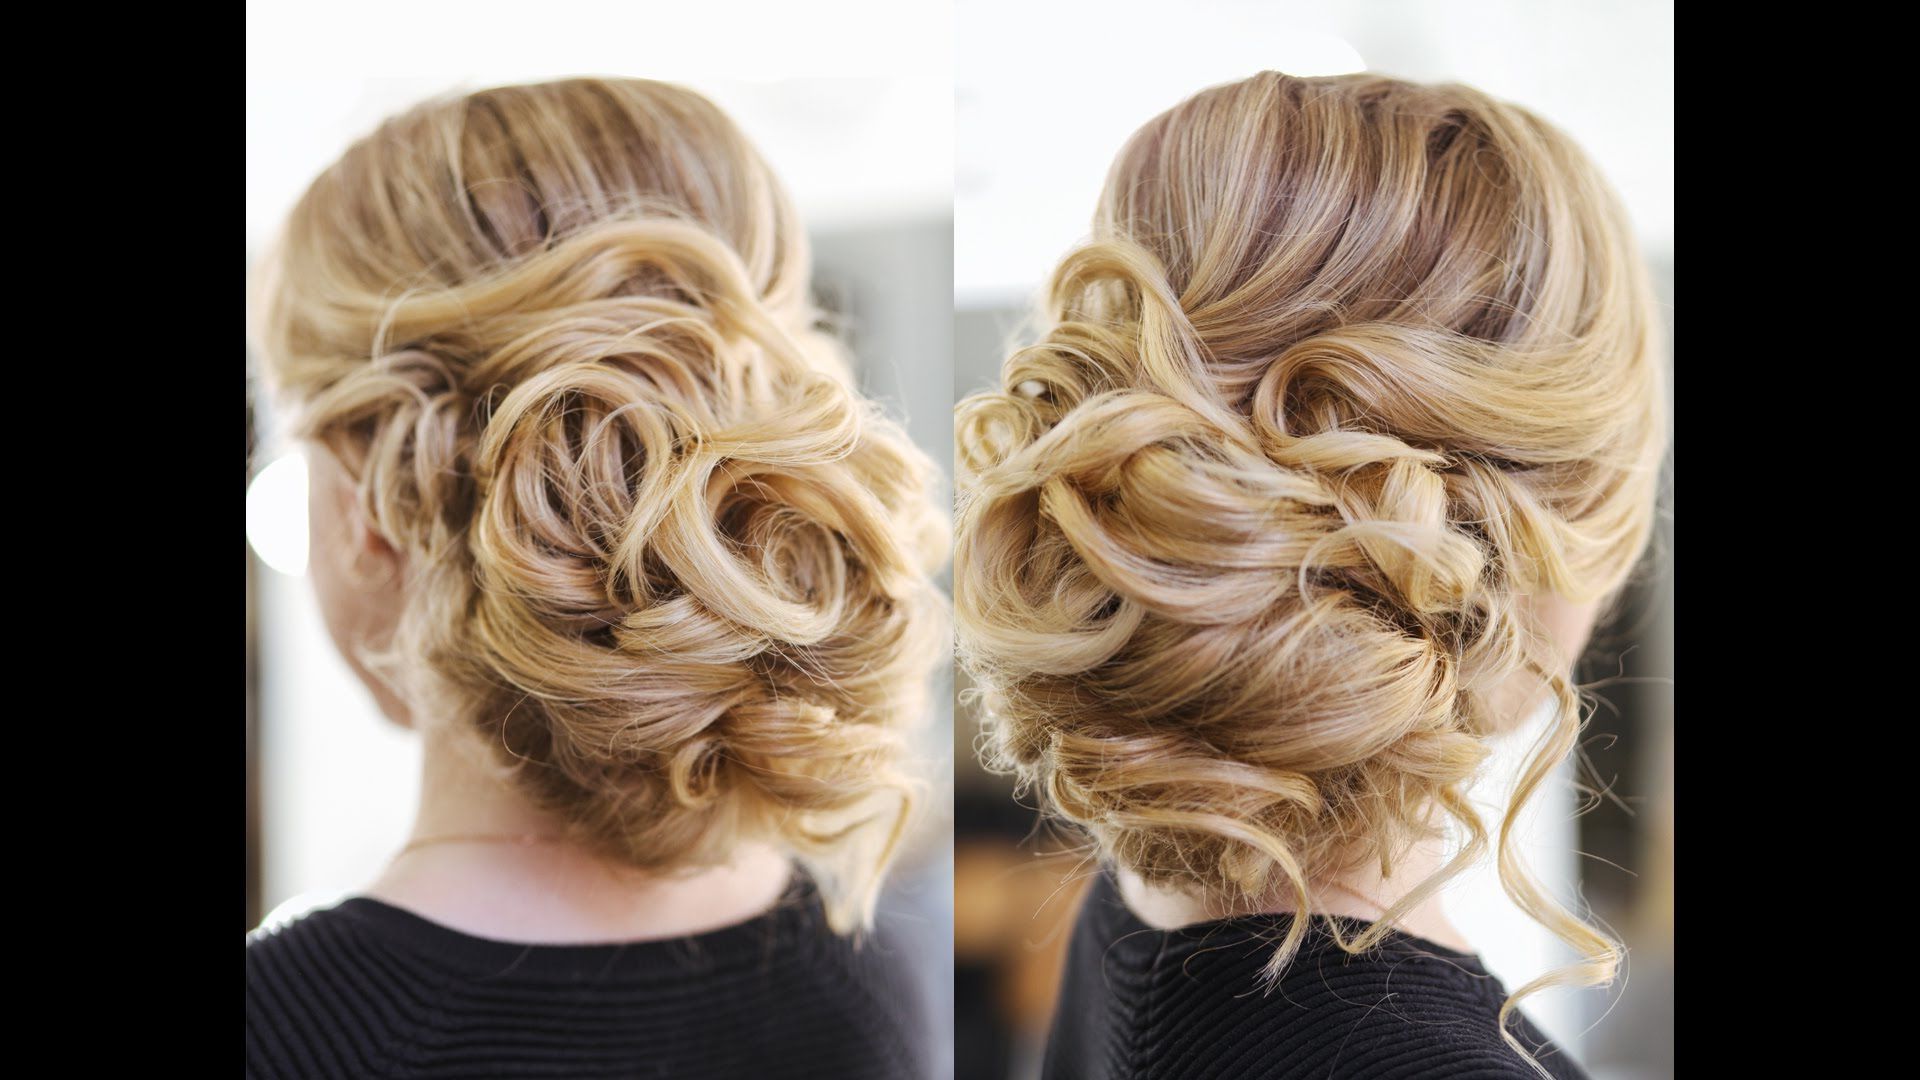 Most Current Elegant Curled Prom Hairstyles Regarding This Video Teaches How To Do A Beautiful, Easy Updo With Big Curls (Gallery 19 of 20)